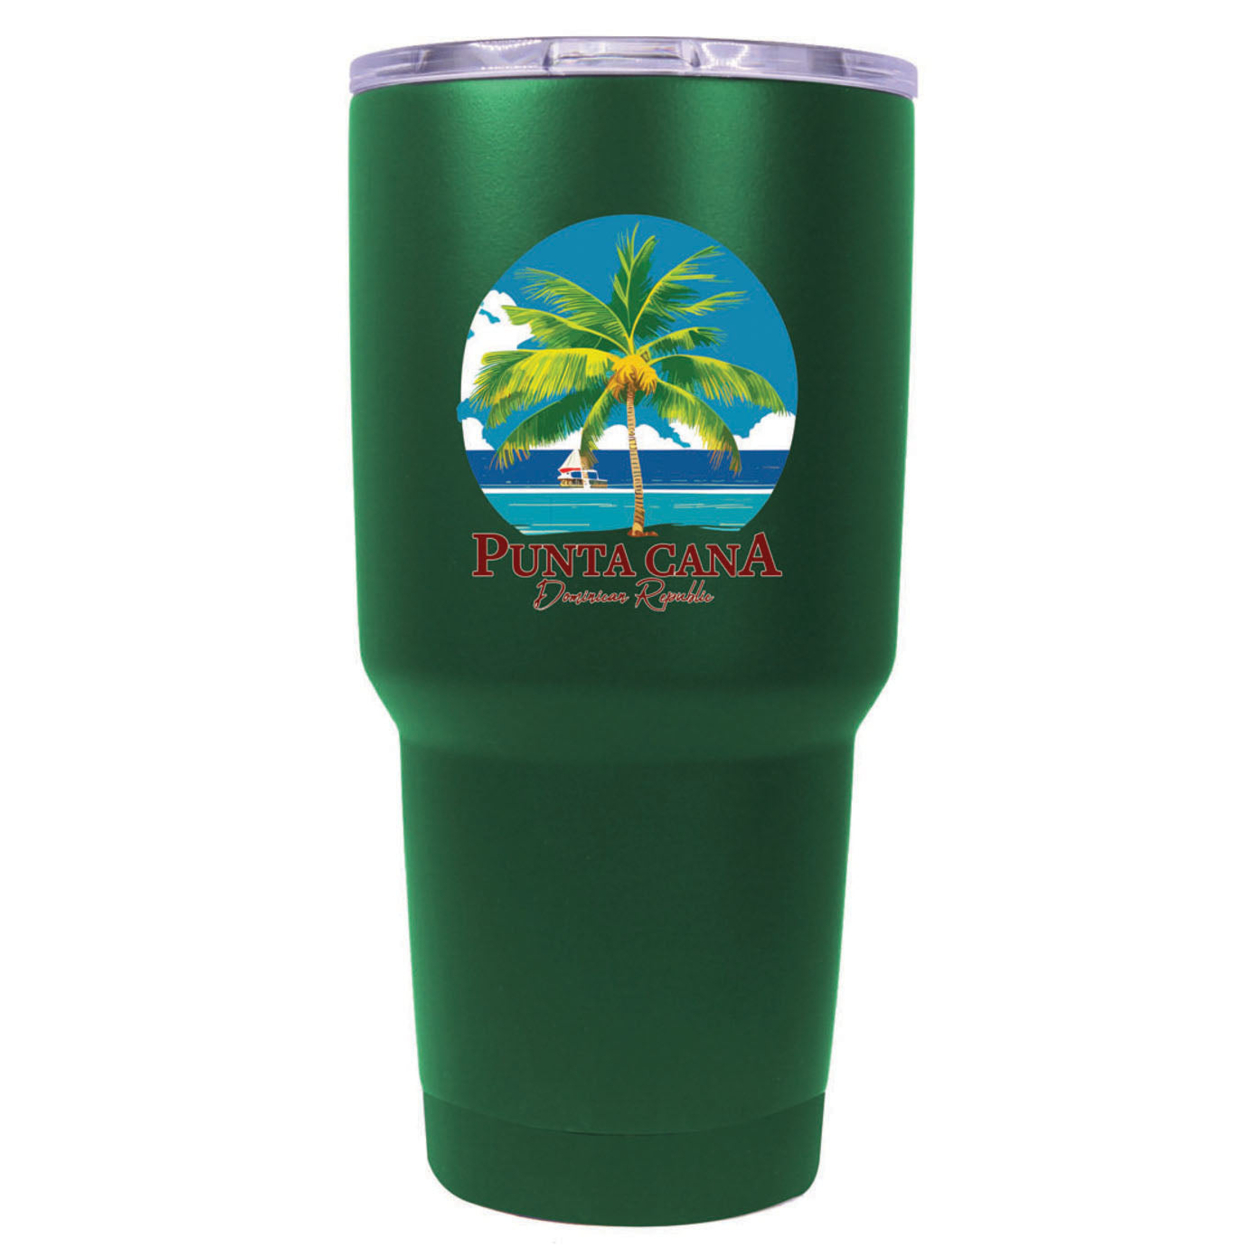 Punta Cana Dominican Republic Souvenir 24 Oz Insulated Stainless Steel Tumbler - Rose Gold, PARROT